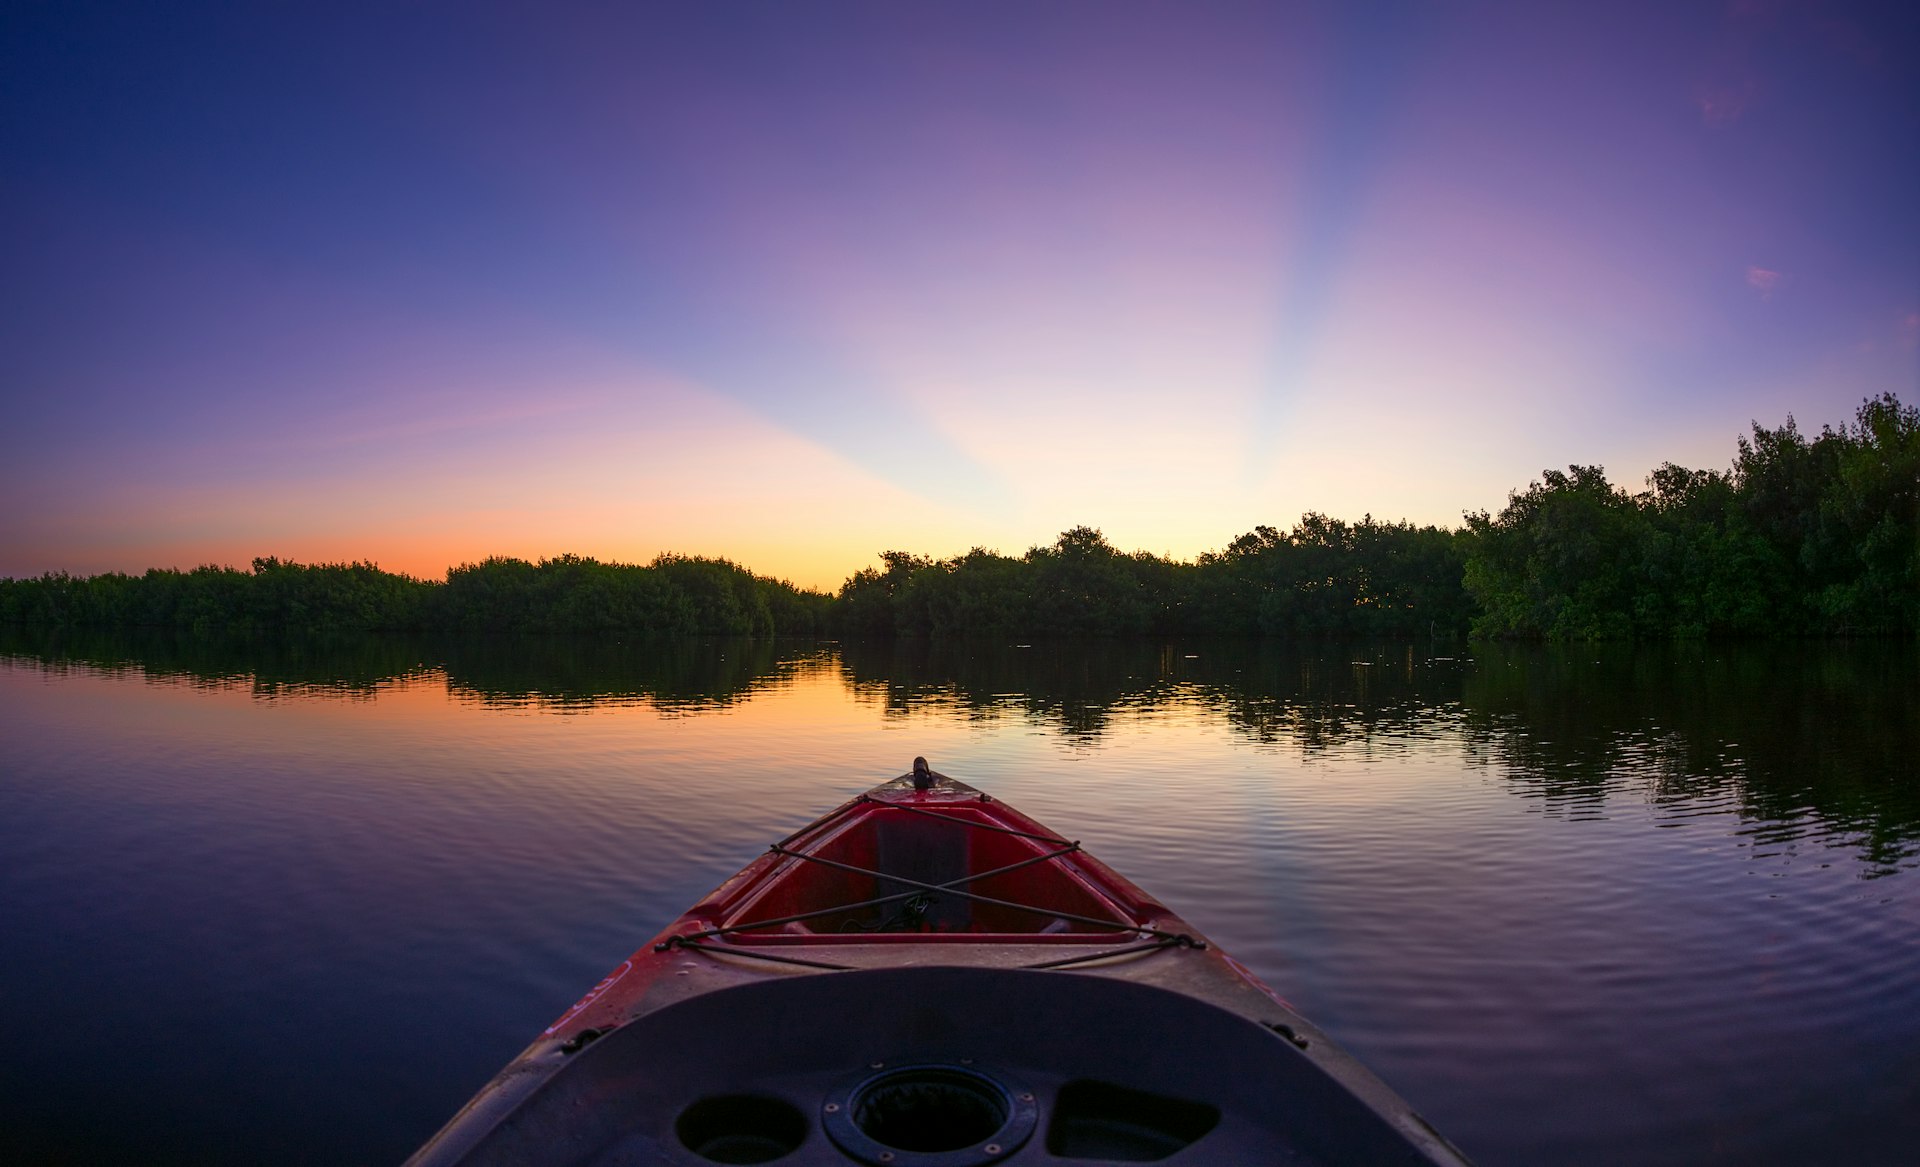 Purple-pink sky at sunrise, seen over the front of a canoe in still water in Fakahatchee Strand Preserve State Park, Florida, USA.